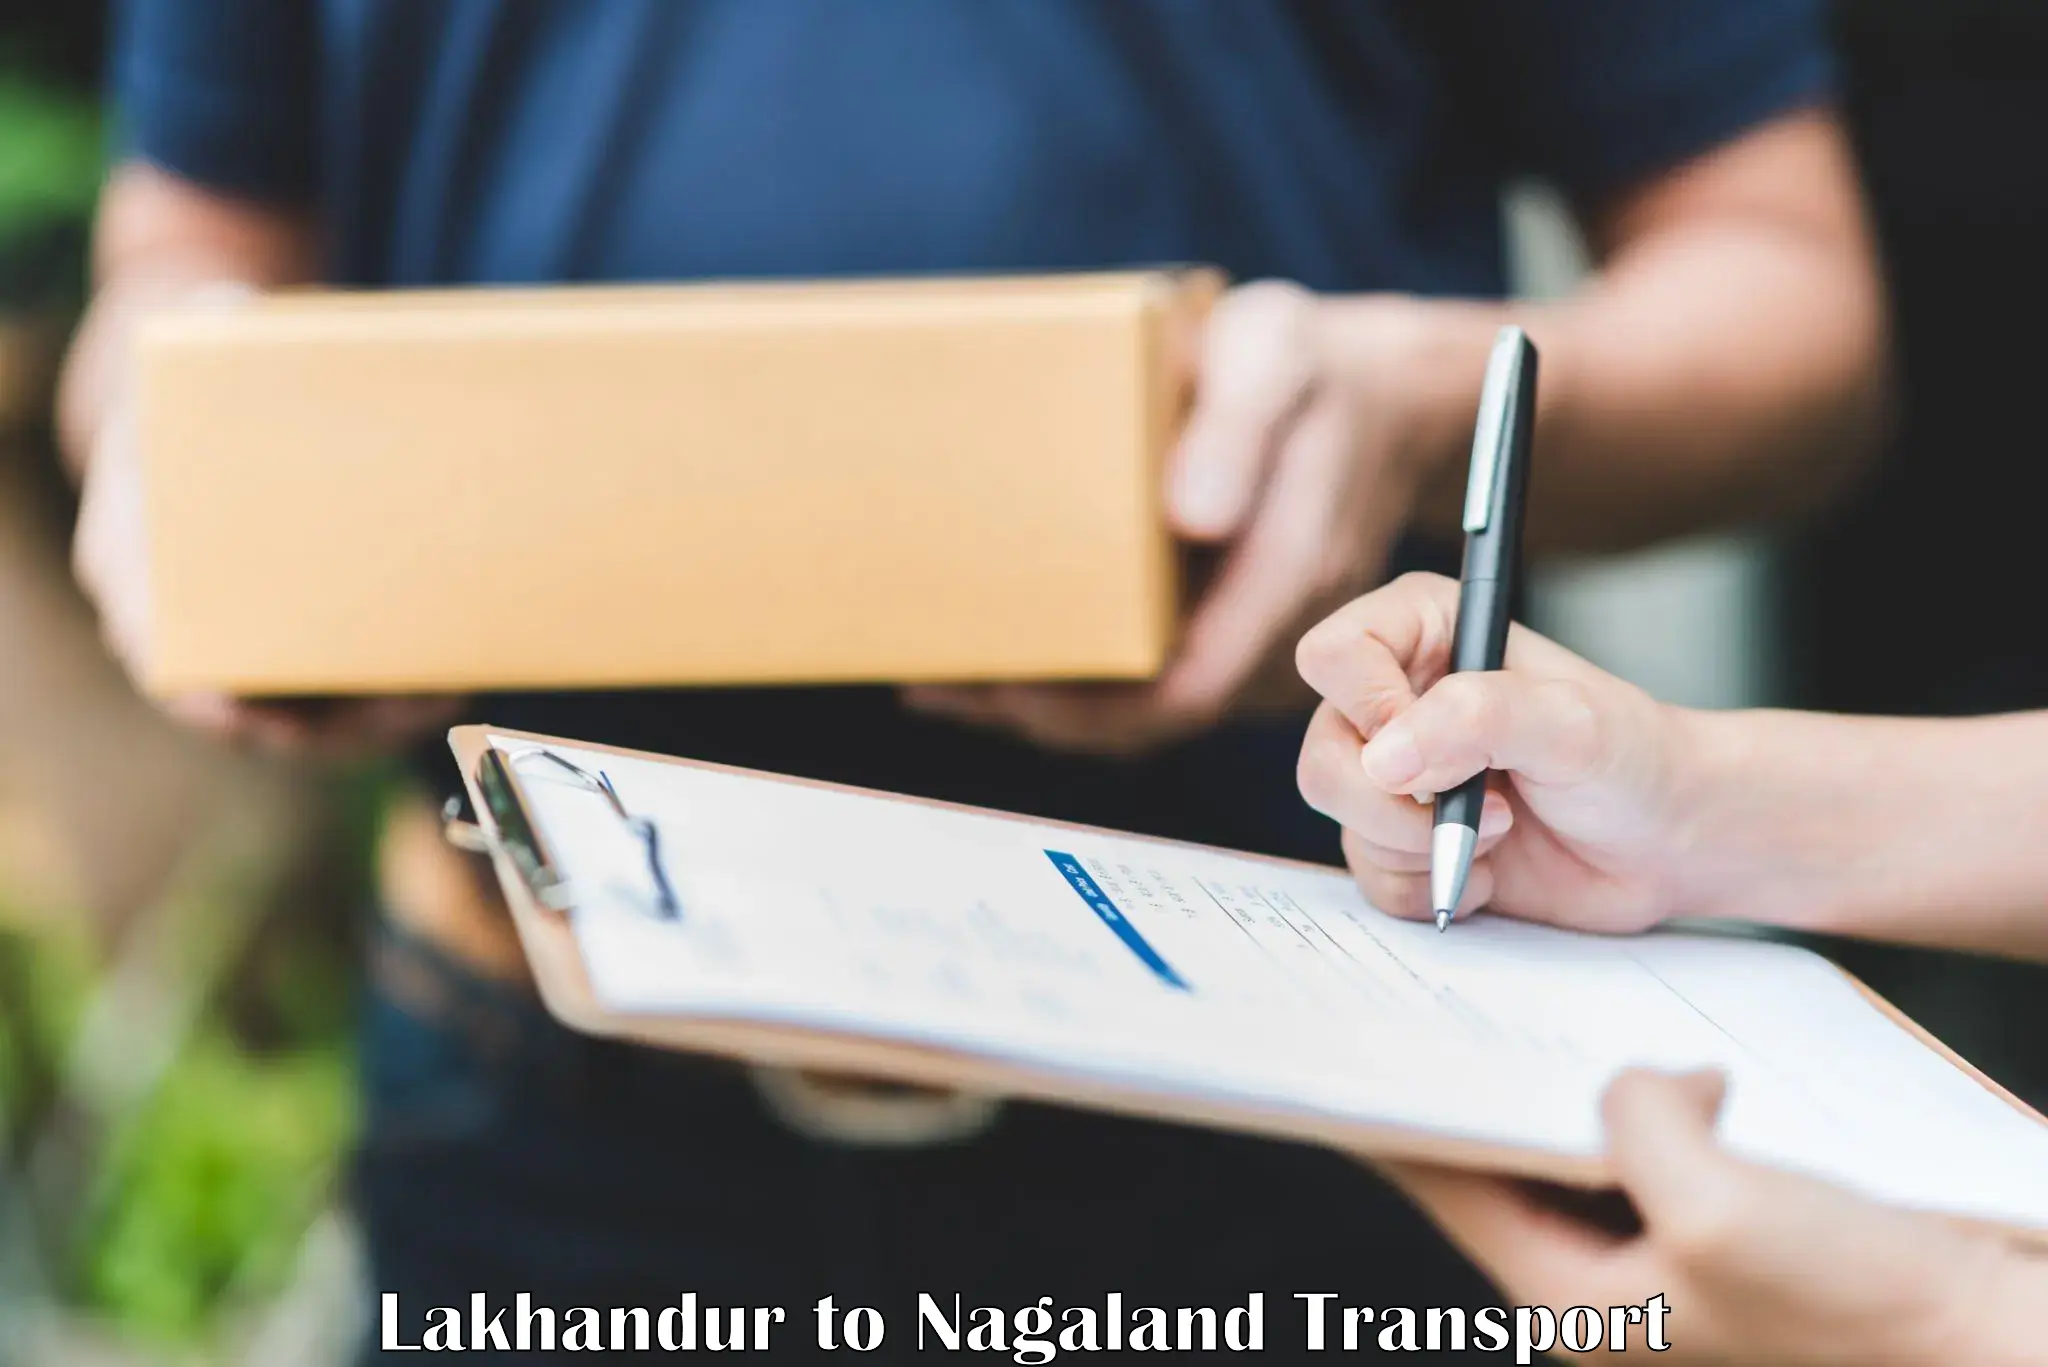 Container transport service Lakhandur to Dimapur